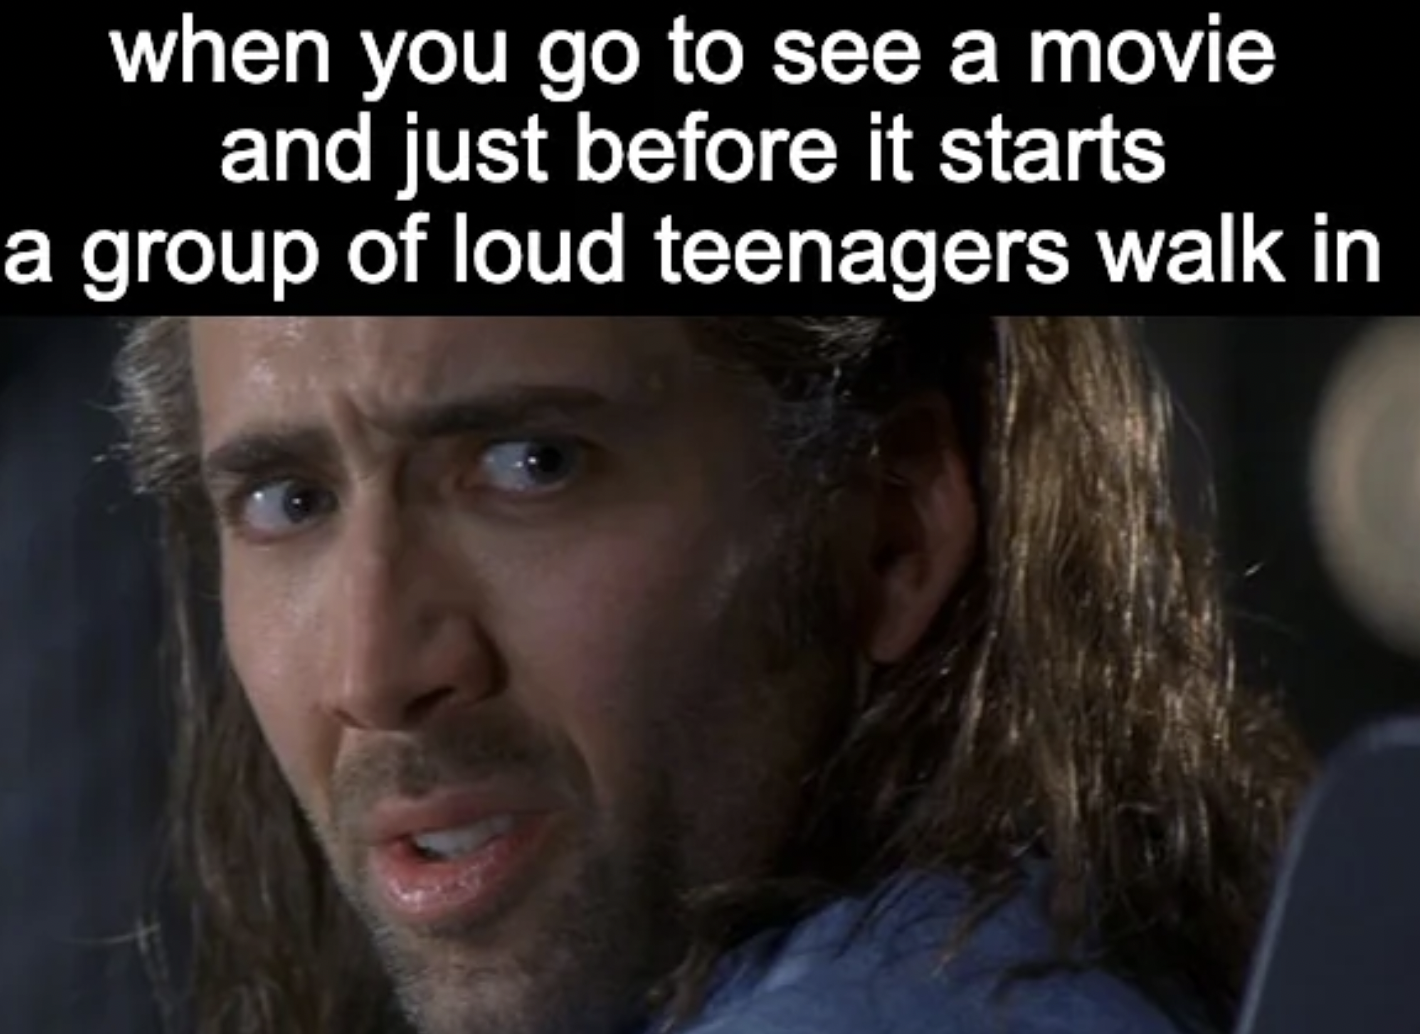 photo caption - when you go to see a movie and just before it starts a group of loud teenagers walk in